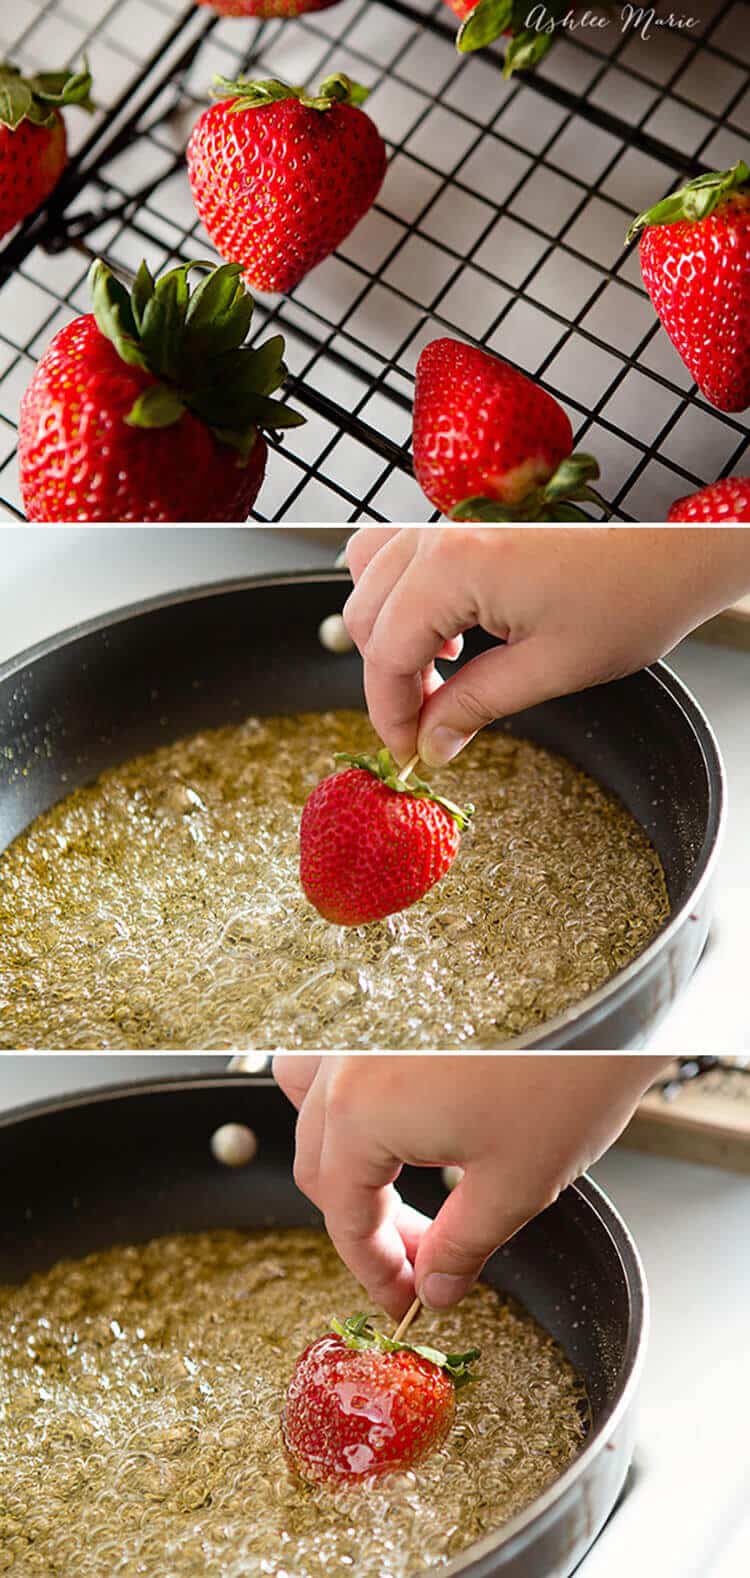 Pick fresh, firm berries to dip in the candy coating